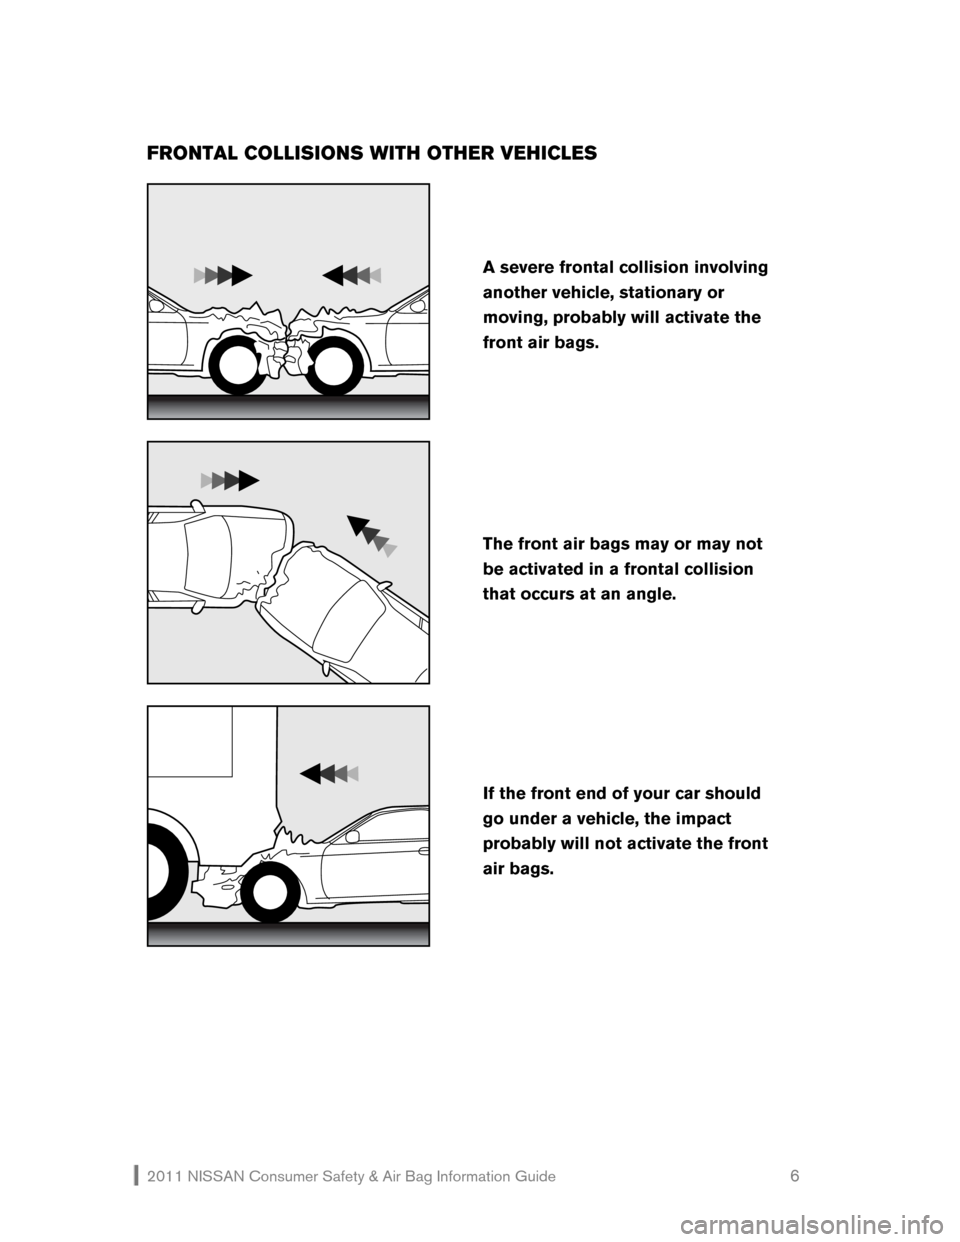 NISSAN CUBE 2011 3.G Consumer Safety Air Bag Information Guide 2011 NISSAN Consumer Safety & Air Bag Information Guide                                                       6 
FRONTAL COLLISIONS WITH OTHER VEHICLES 
 
 
 
 
If the front end of your car should 
go